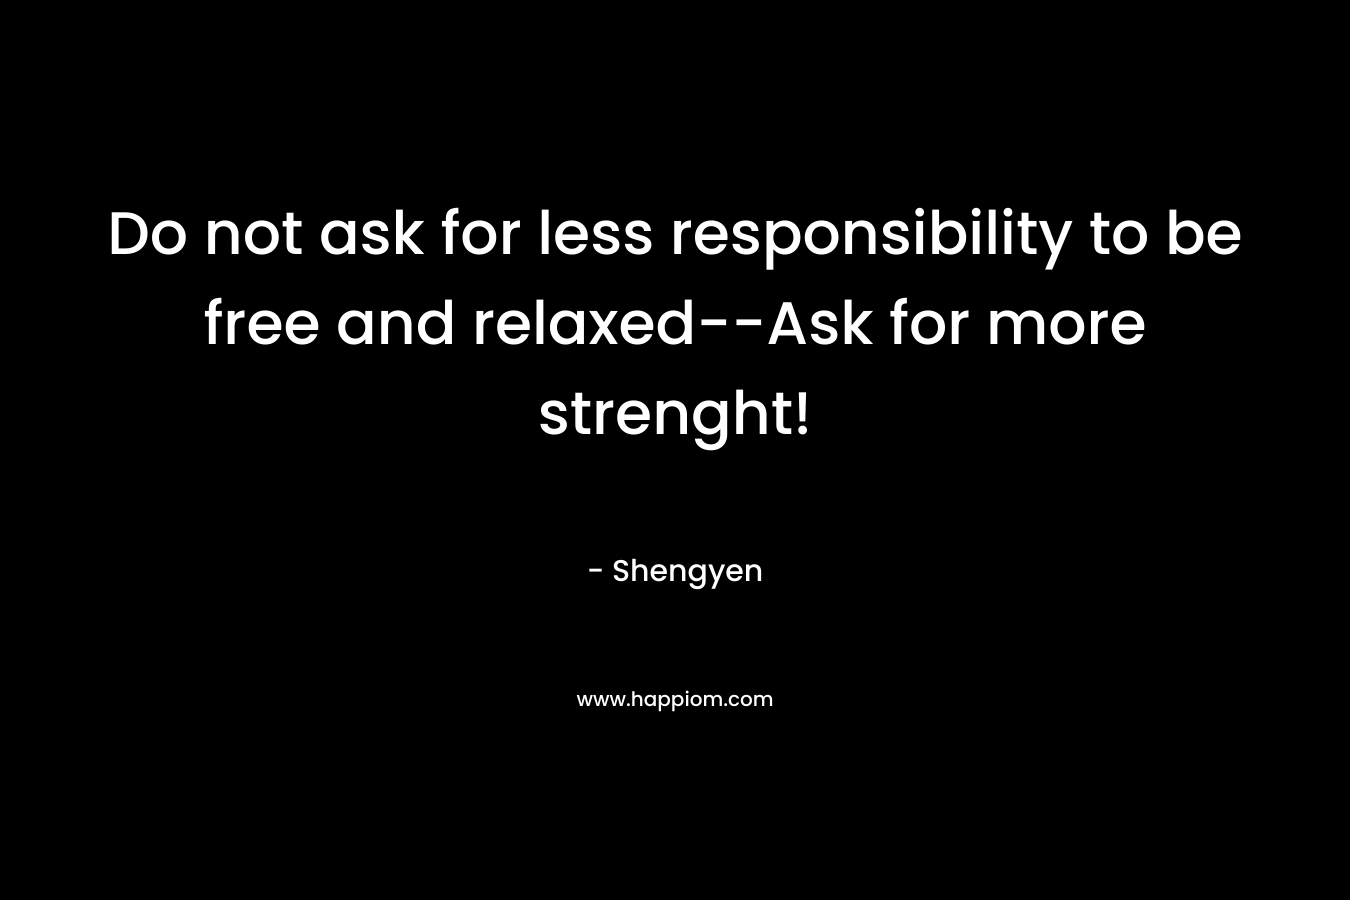 Do not ask for less responsibility to be free and relaxed--Ask for more strenght!